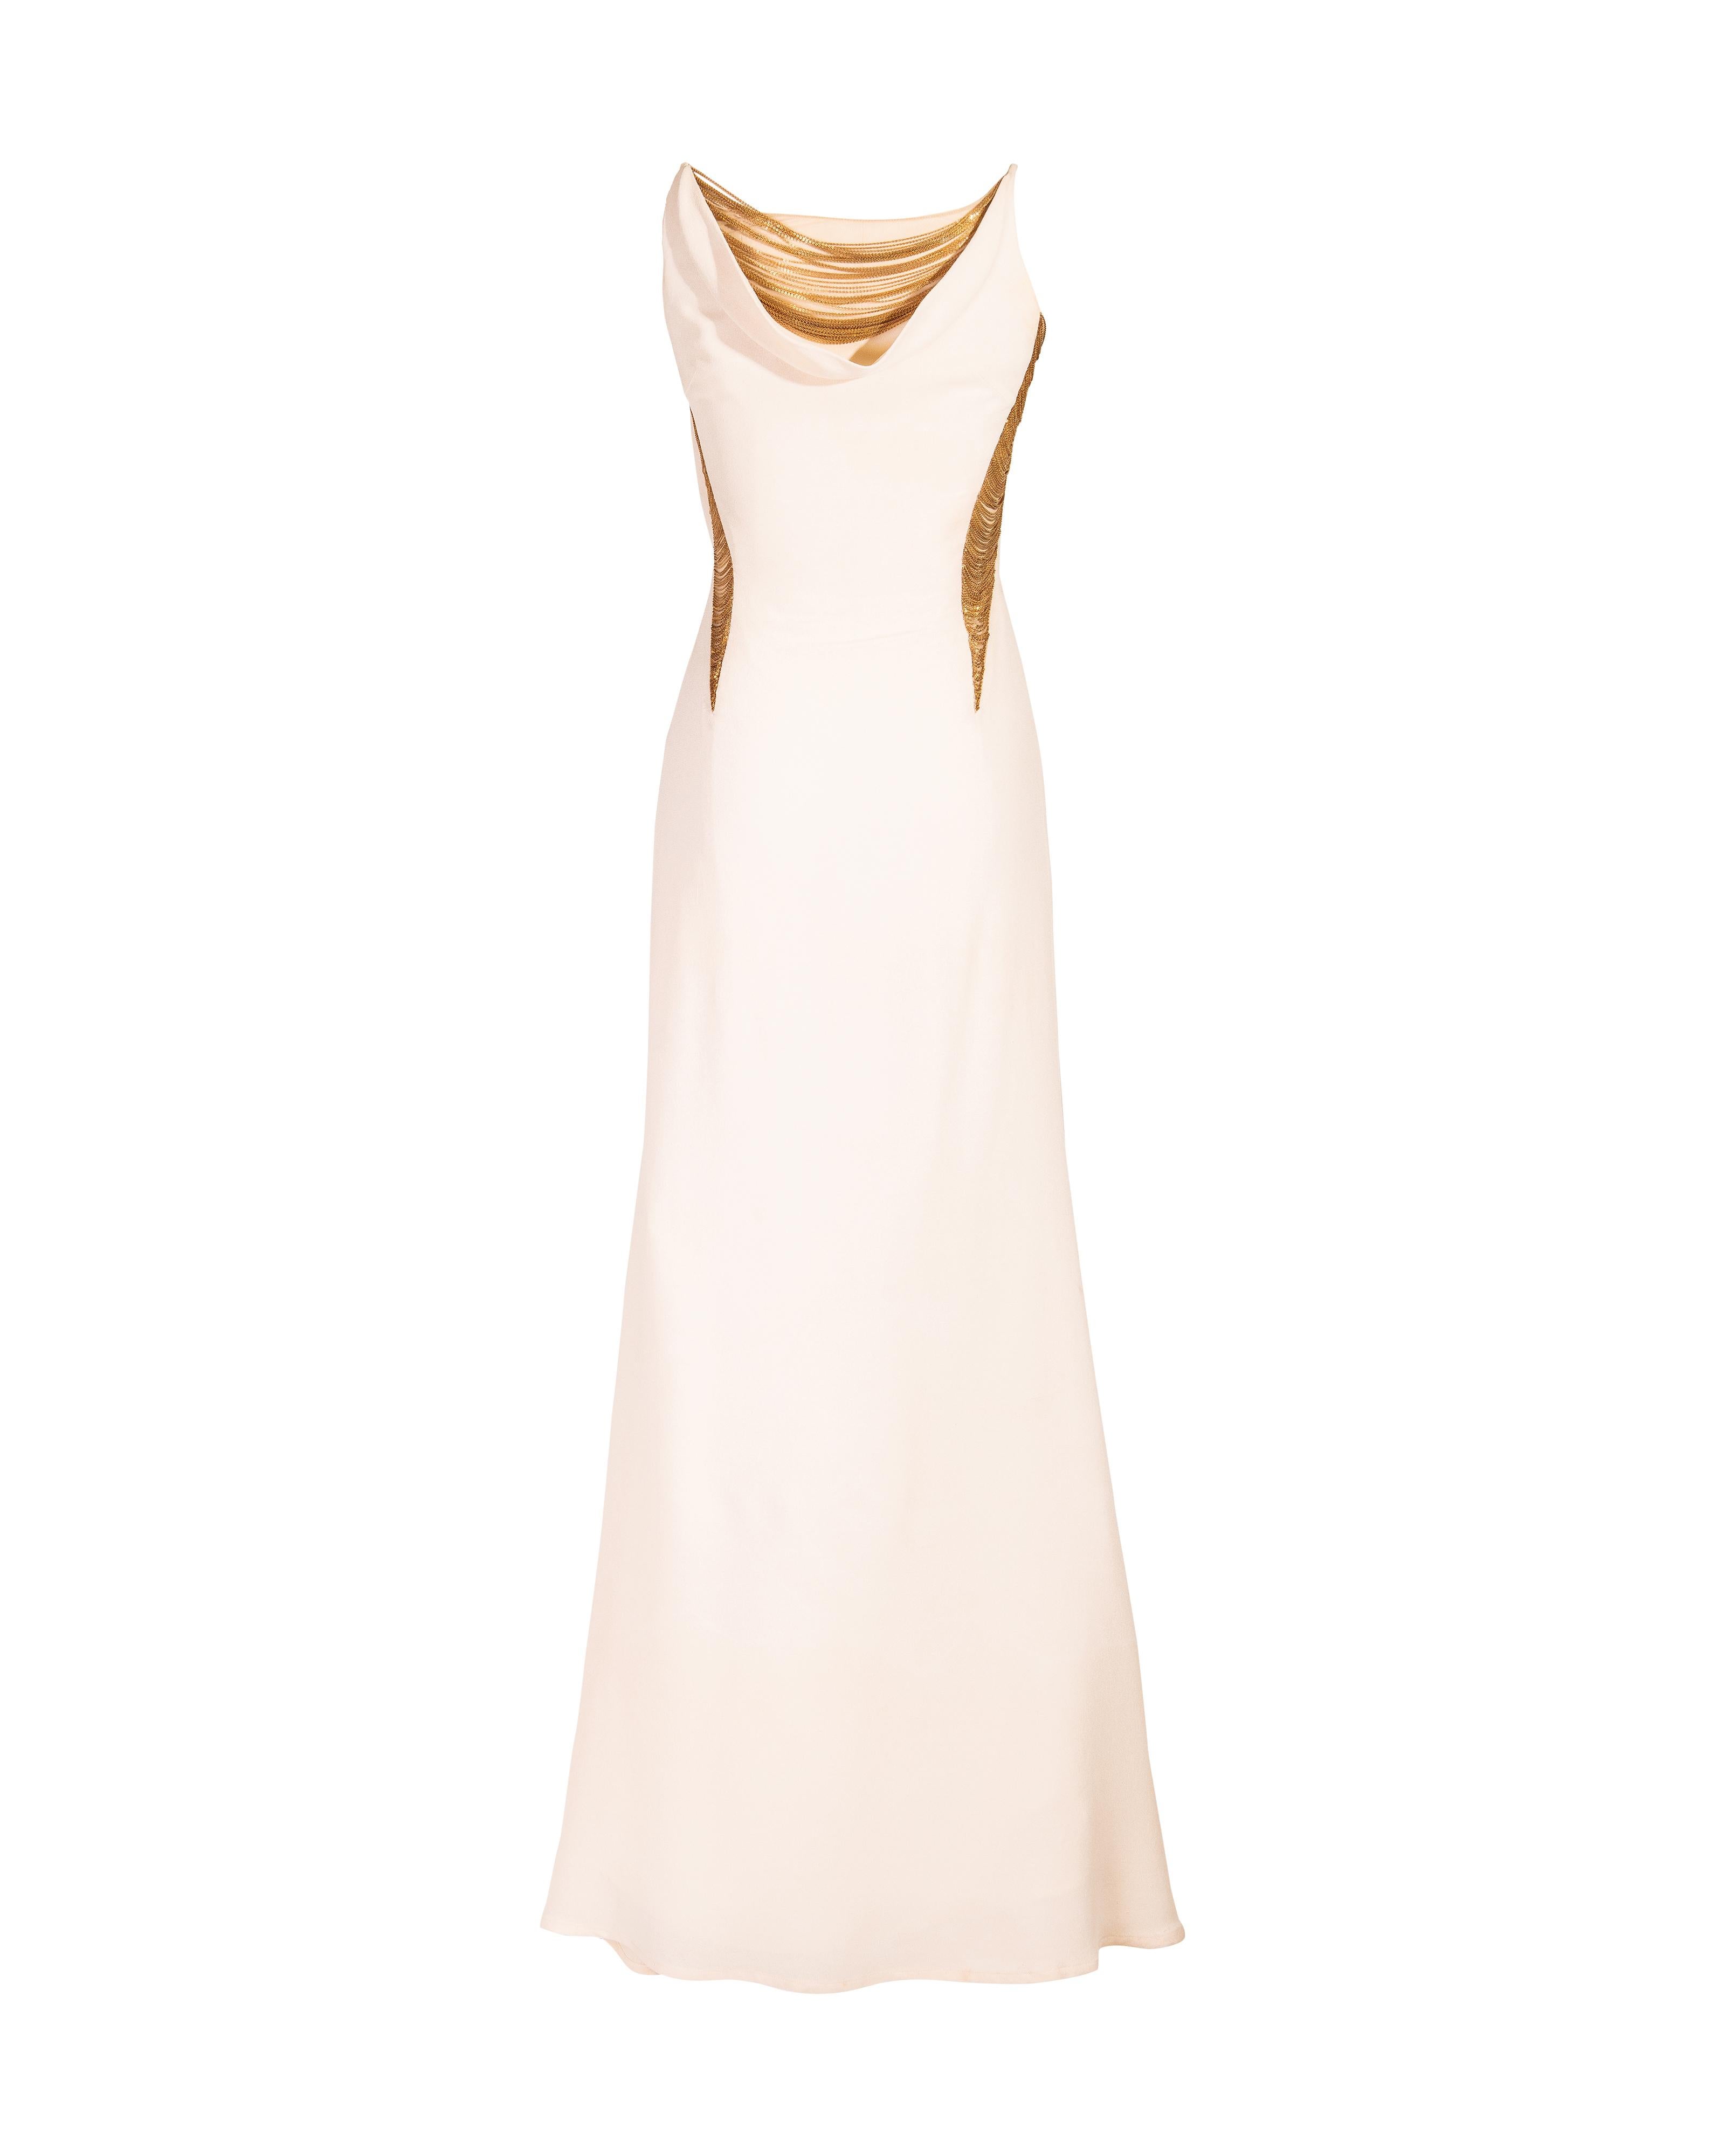 S/S 2006 Alexander McQueen Gold Chain White Gown In Good Condition In North Hollywood, CA